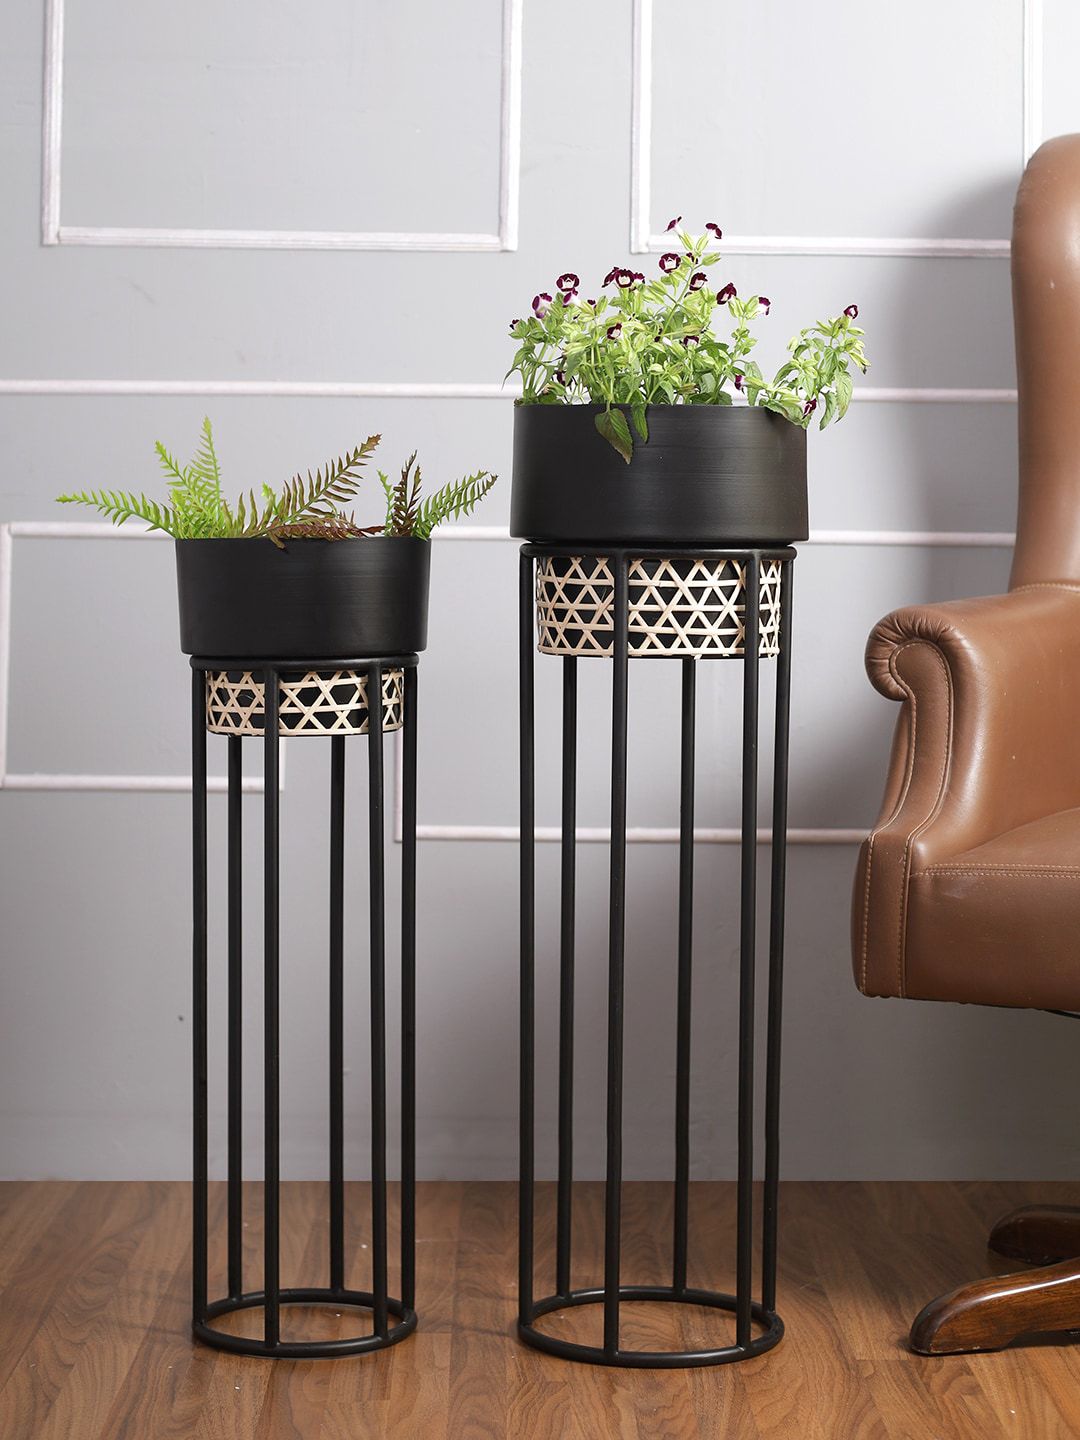 Aapno Rajasthan Set Of 2 Solid Metal Planters With Stand Price in India